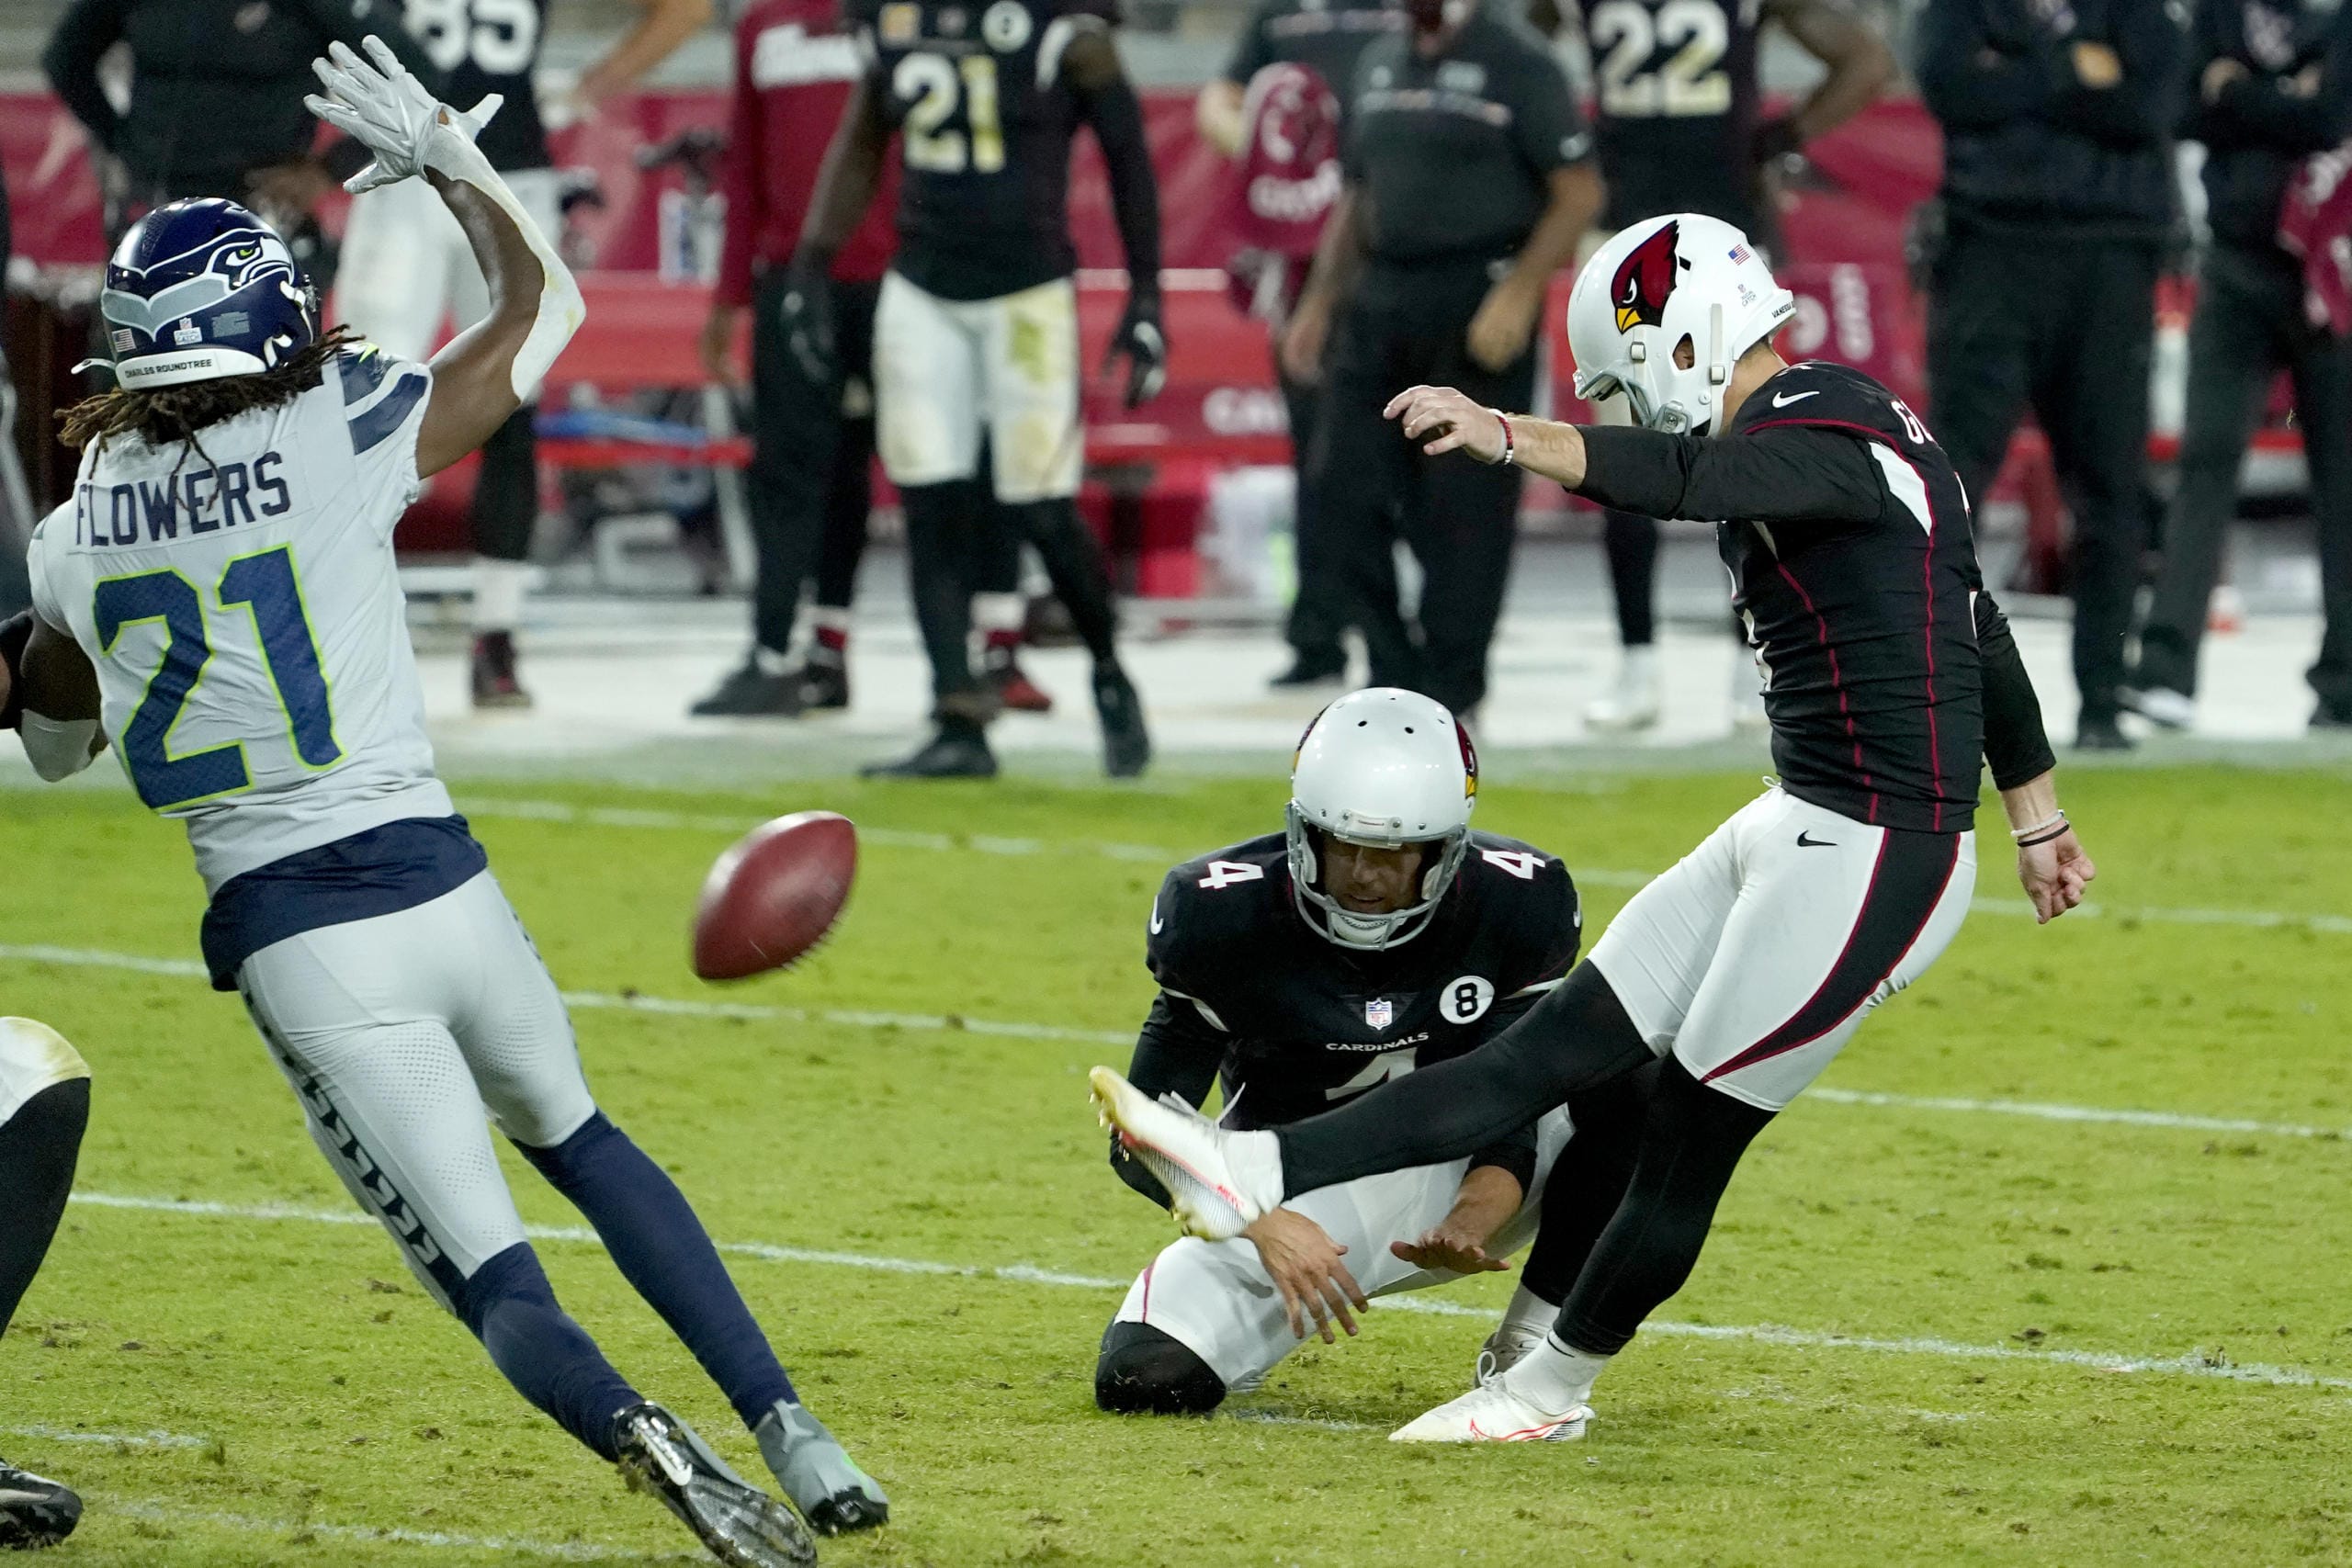 Arizona Cardinals kicker Zane Gonzalez kicks the game winning field goal as punter Andy Lee (4) holds during the second half of an NFL football game against the Seattle Seahawks, Sunday, Oct. 25, 2020, in Glendale, Ariz. The Cardinals won 37-34 in overtime.